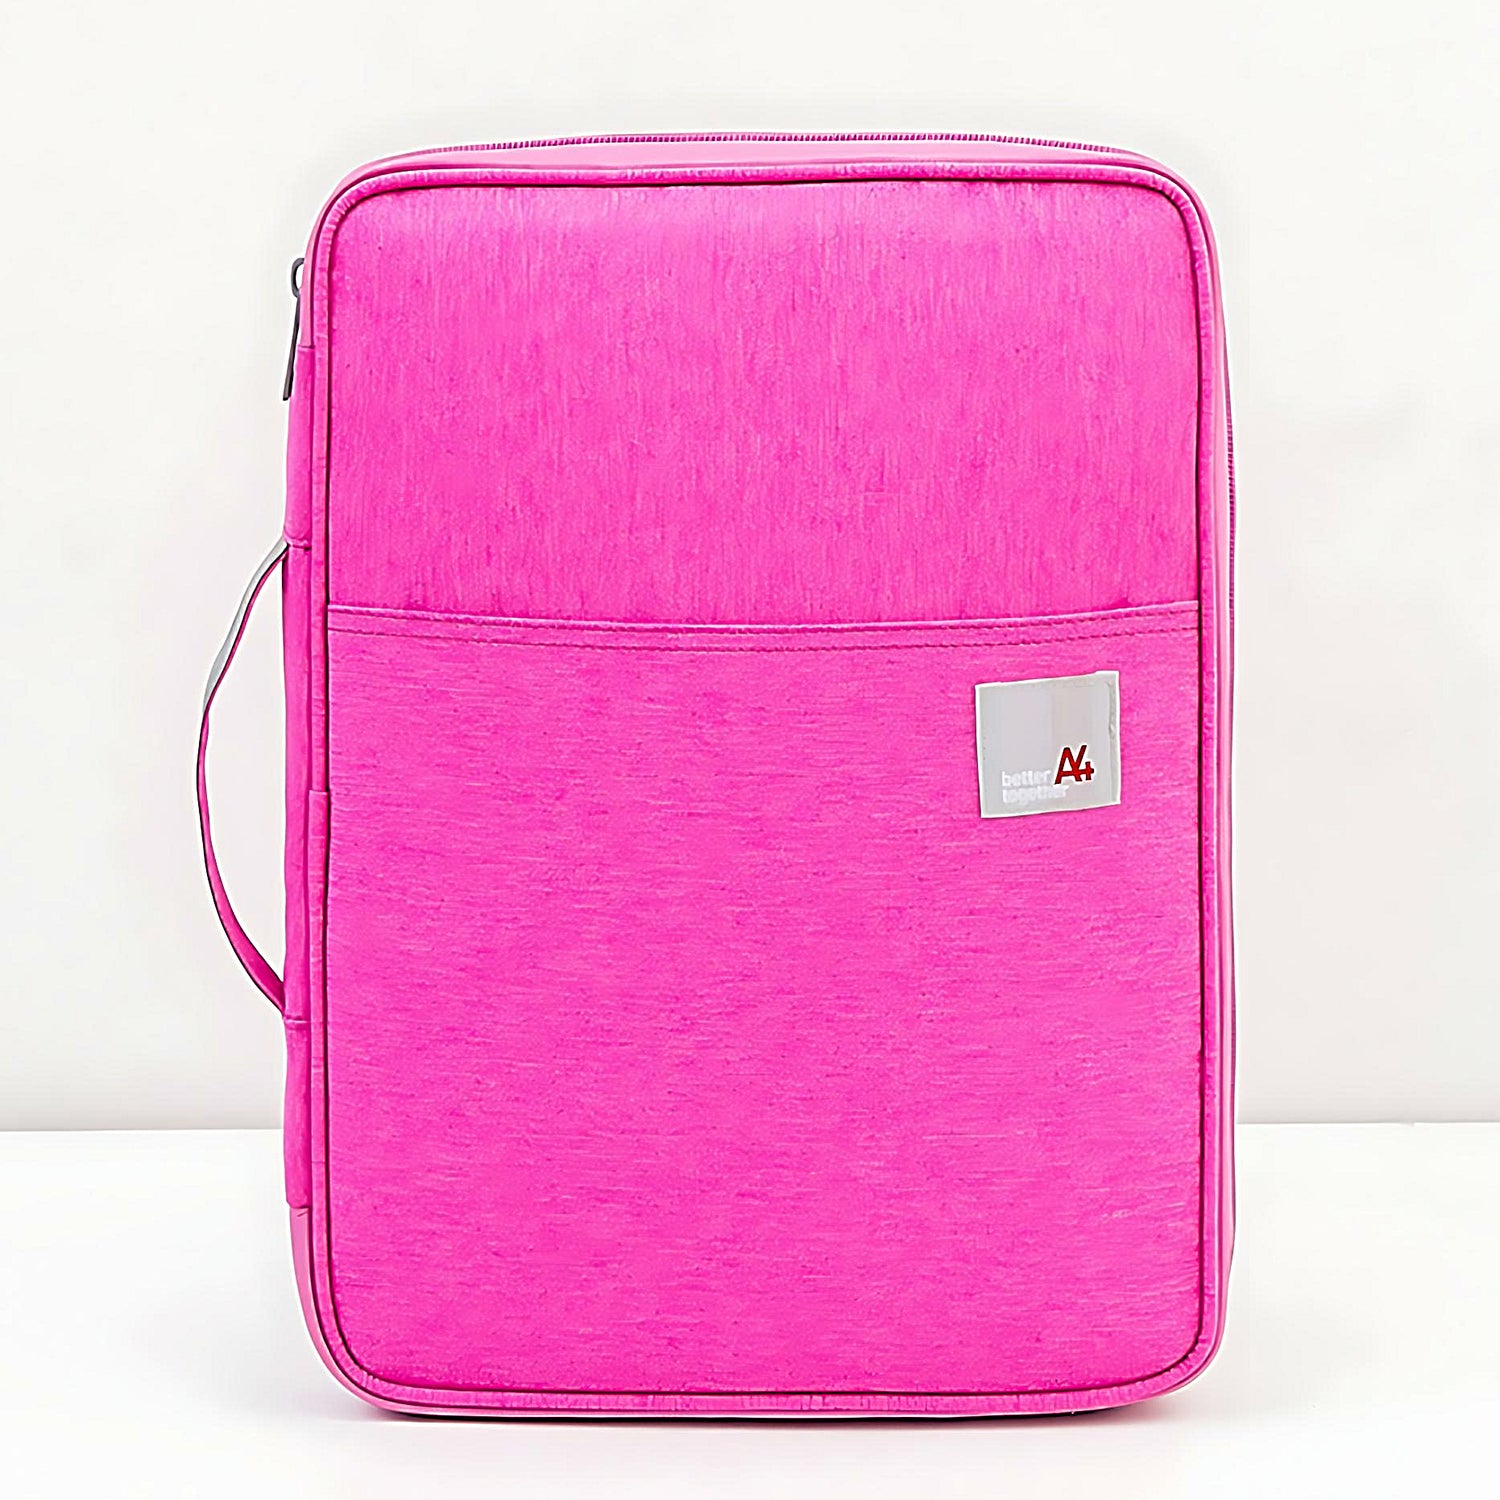 a laptop briefcase in pink color on a white background